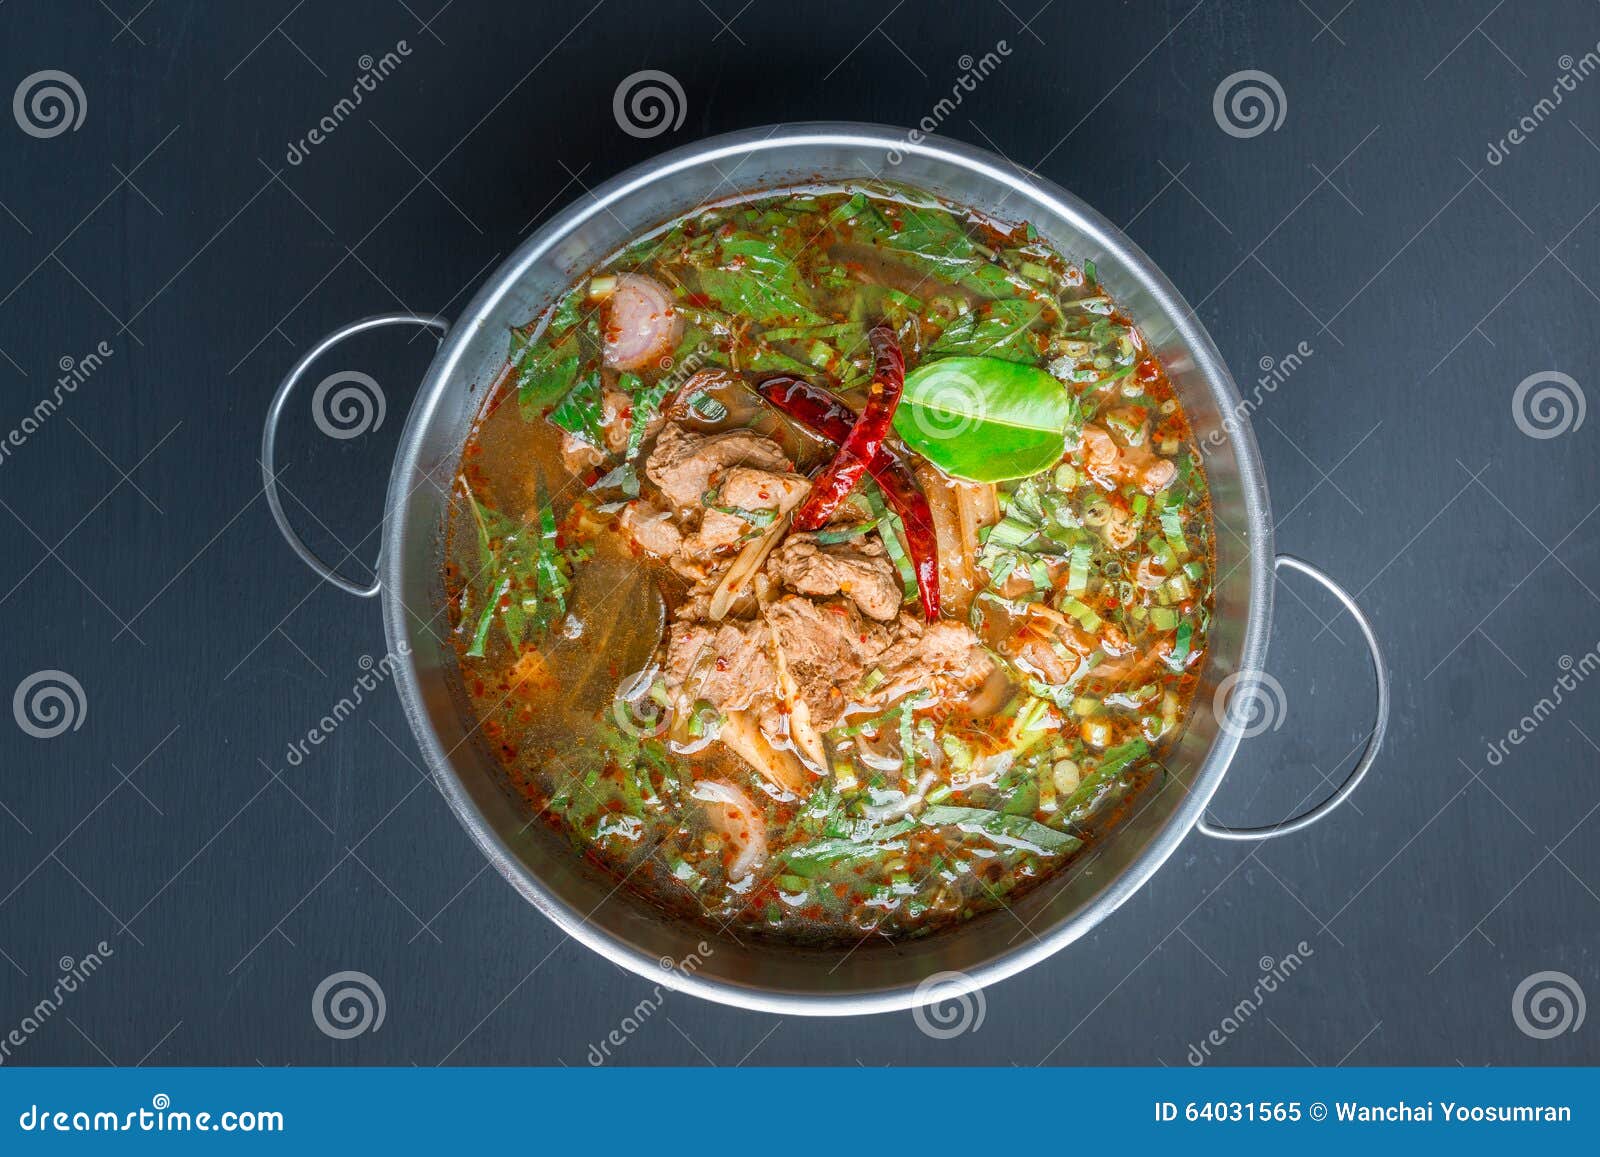 Spicy Thai Style Beef Soup on Black Background Stock Image - Image of ...